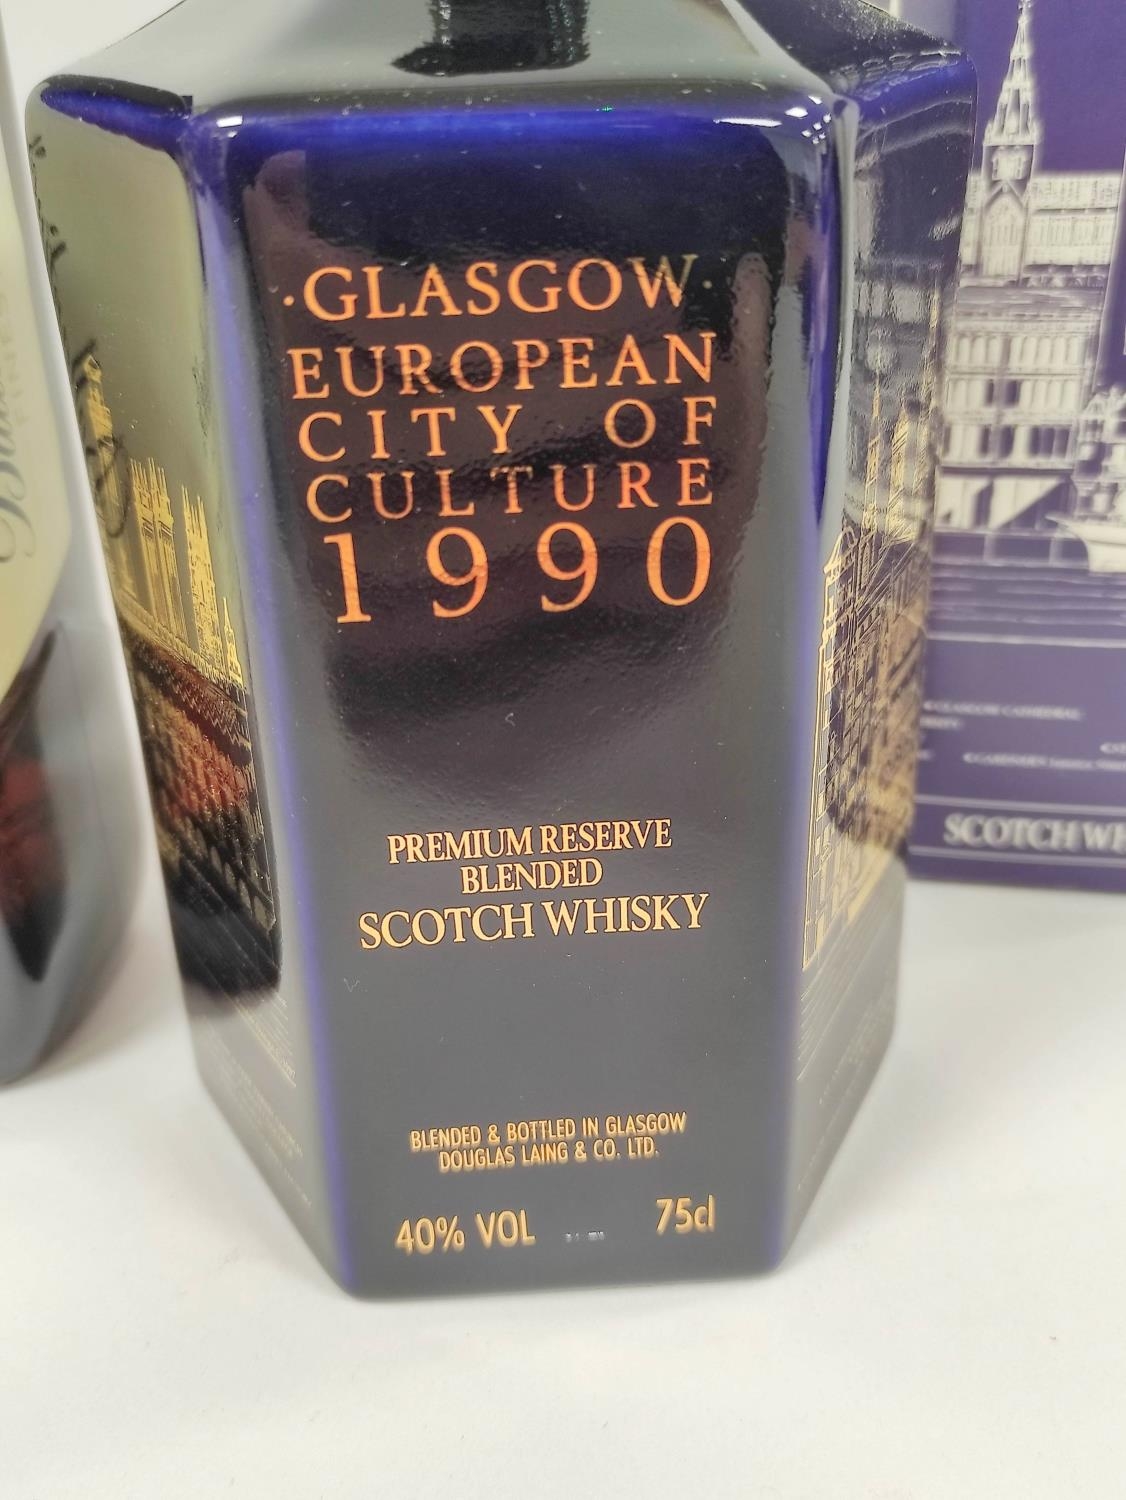 Glasgow European City of Culture 1990 premium reserve blended Scotch whisky, Blended & bottled in - Image 3 of 5